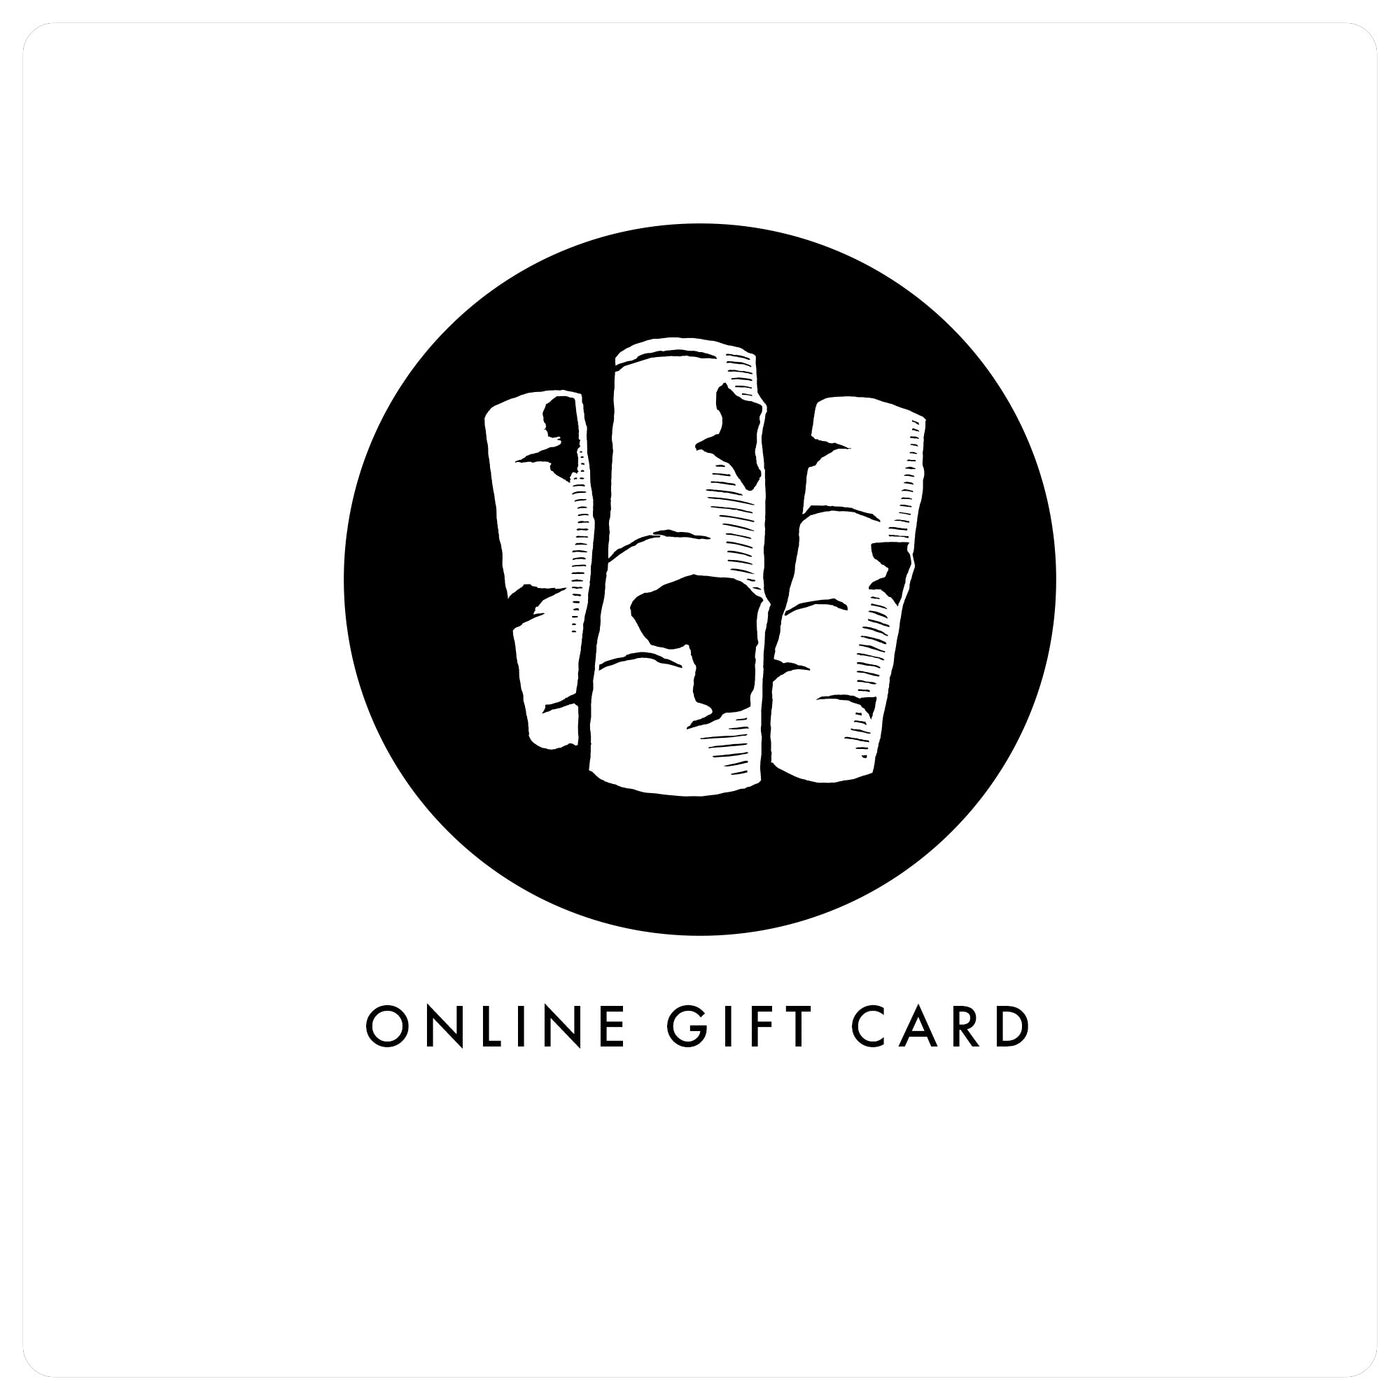 Gift Card - ONLINE